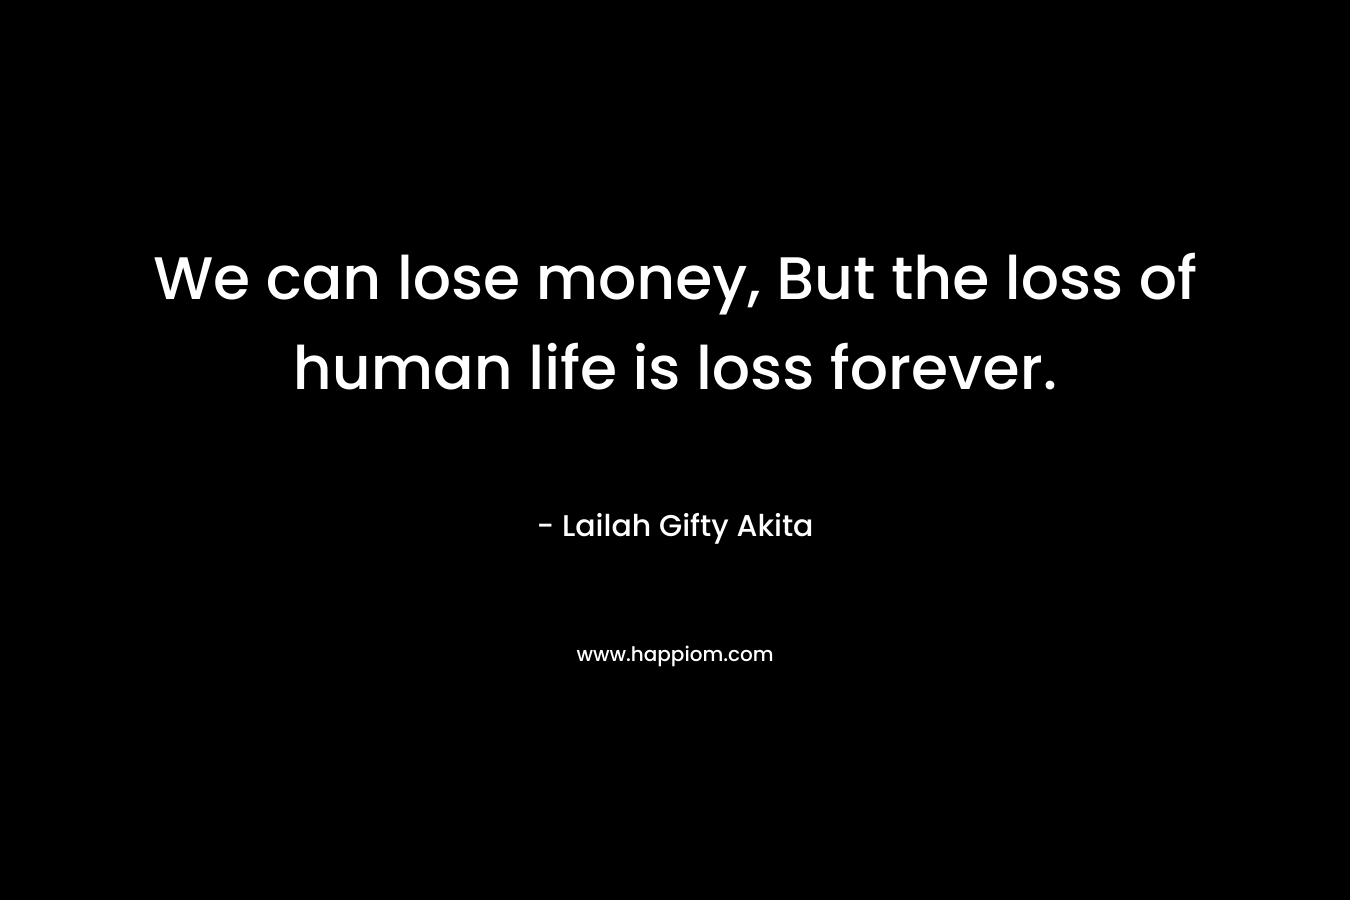 We can lose money, But the loss of human life is loss forever.